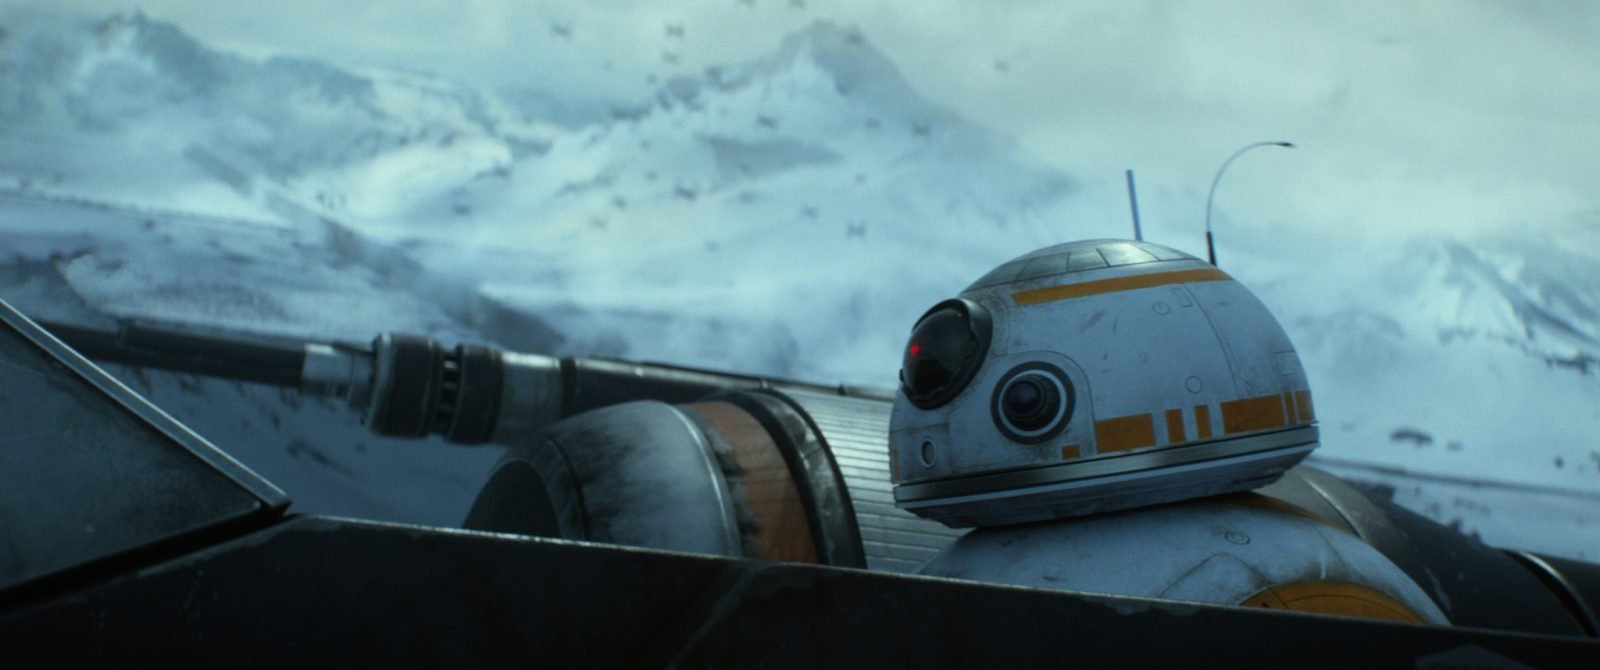 Star Wars VII The Force Awakens 2 - BB-8 in X-Wing